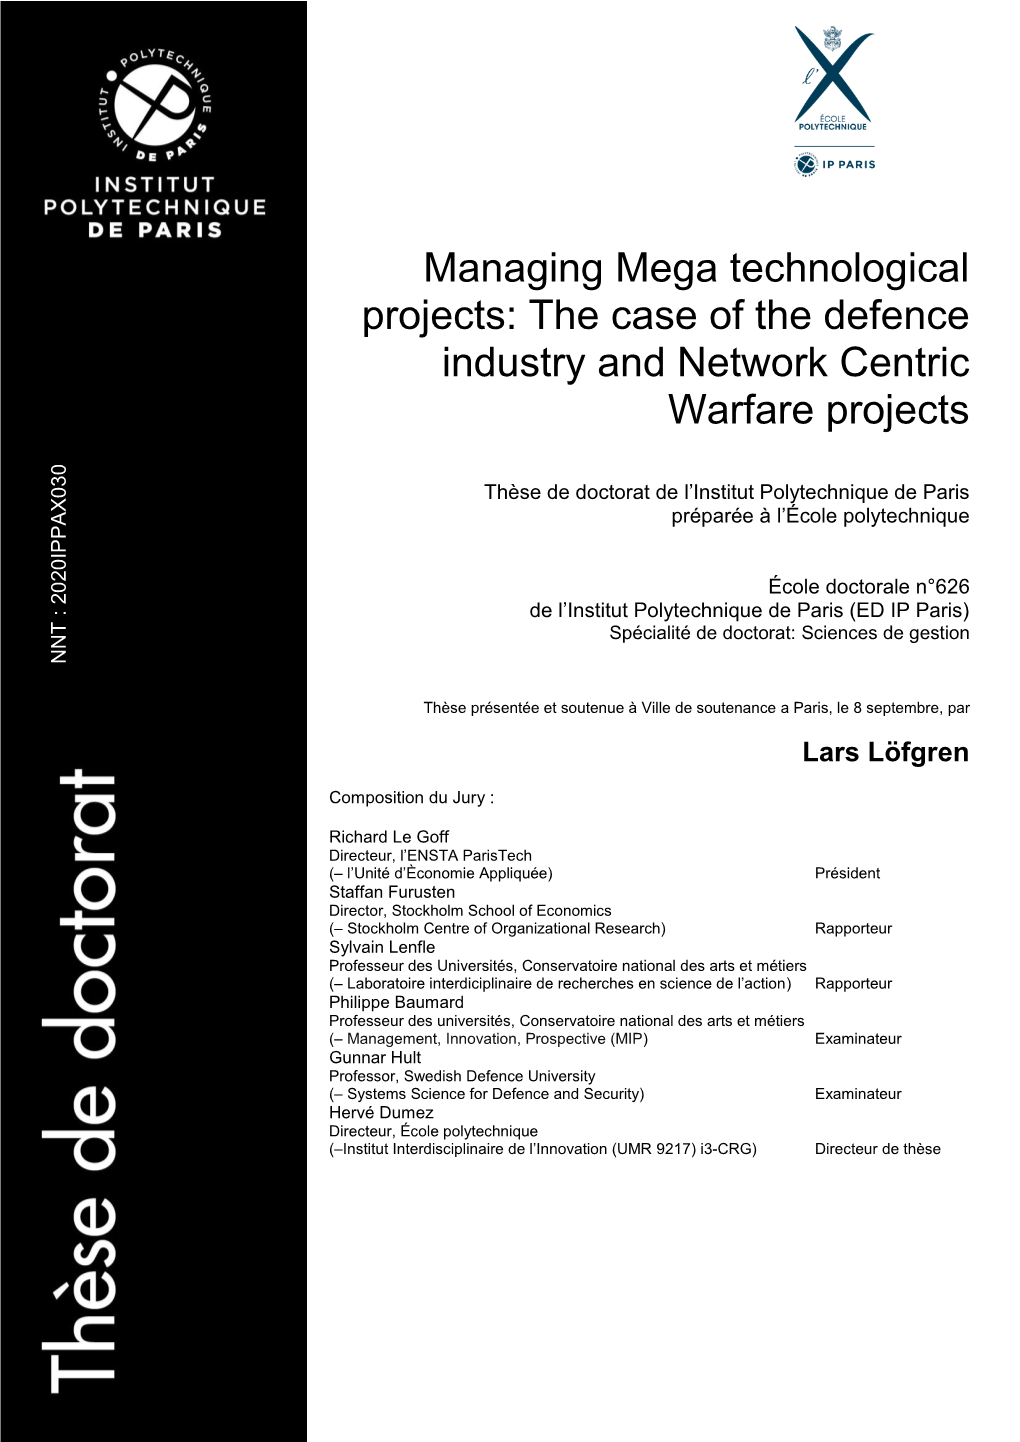 Managing Mega Technological Projects: the Case of the Defence Industry and Network Centric Warfare Projects